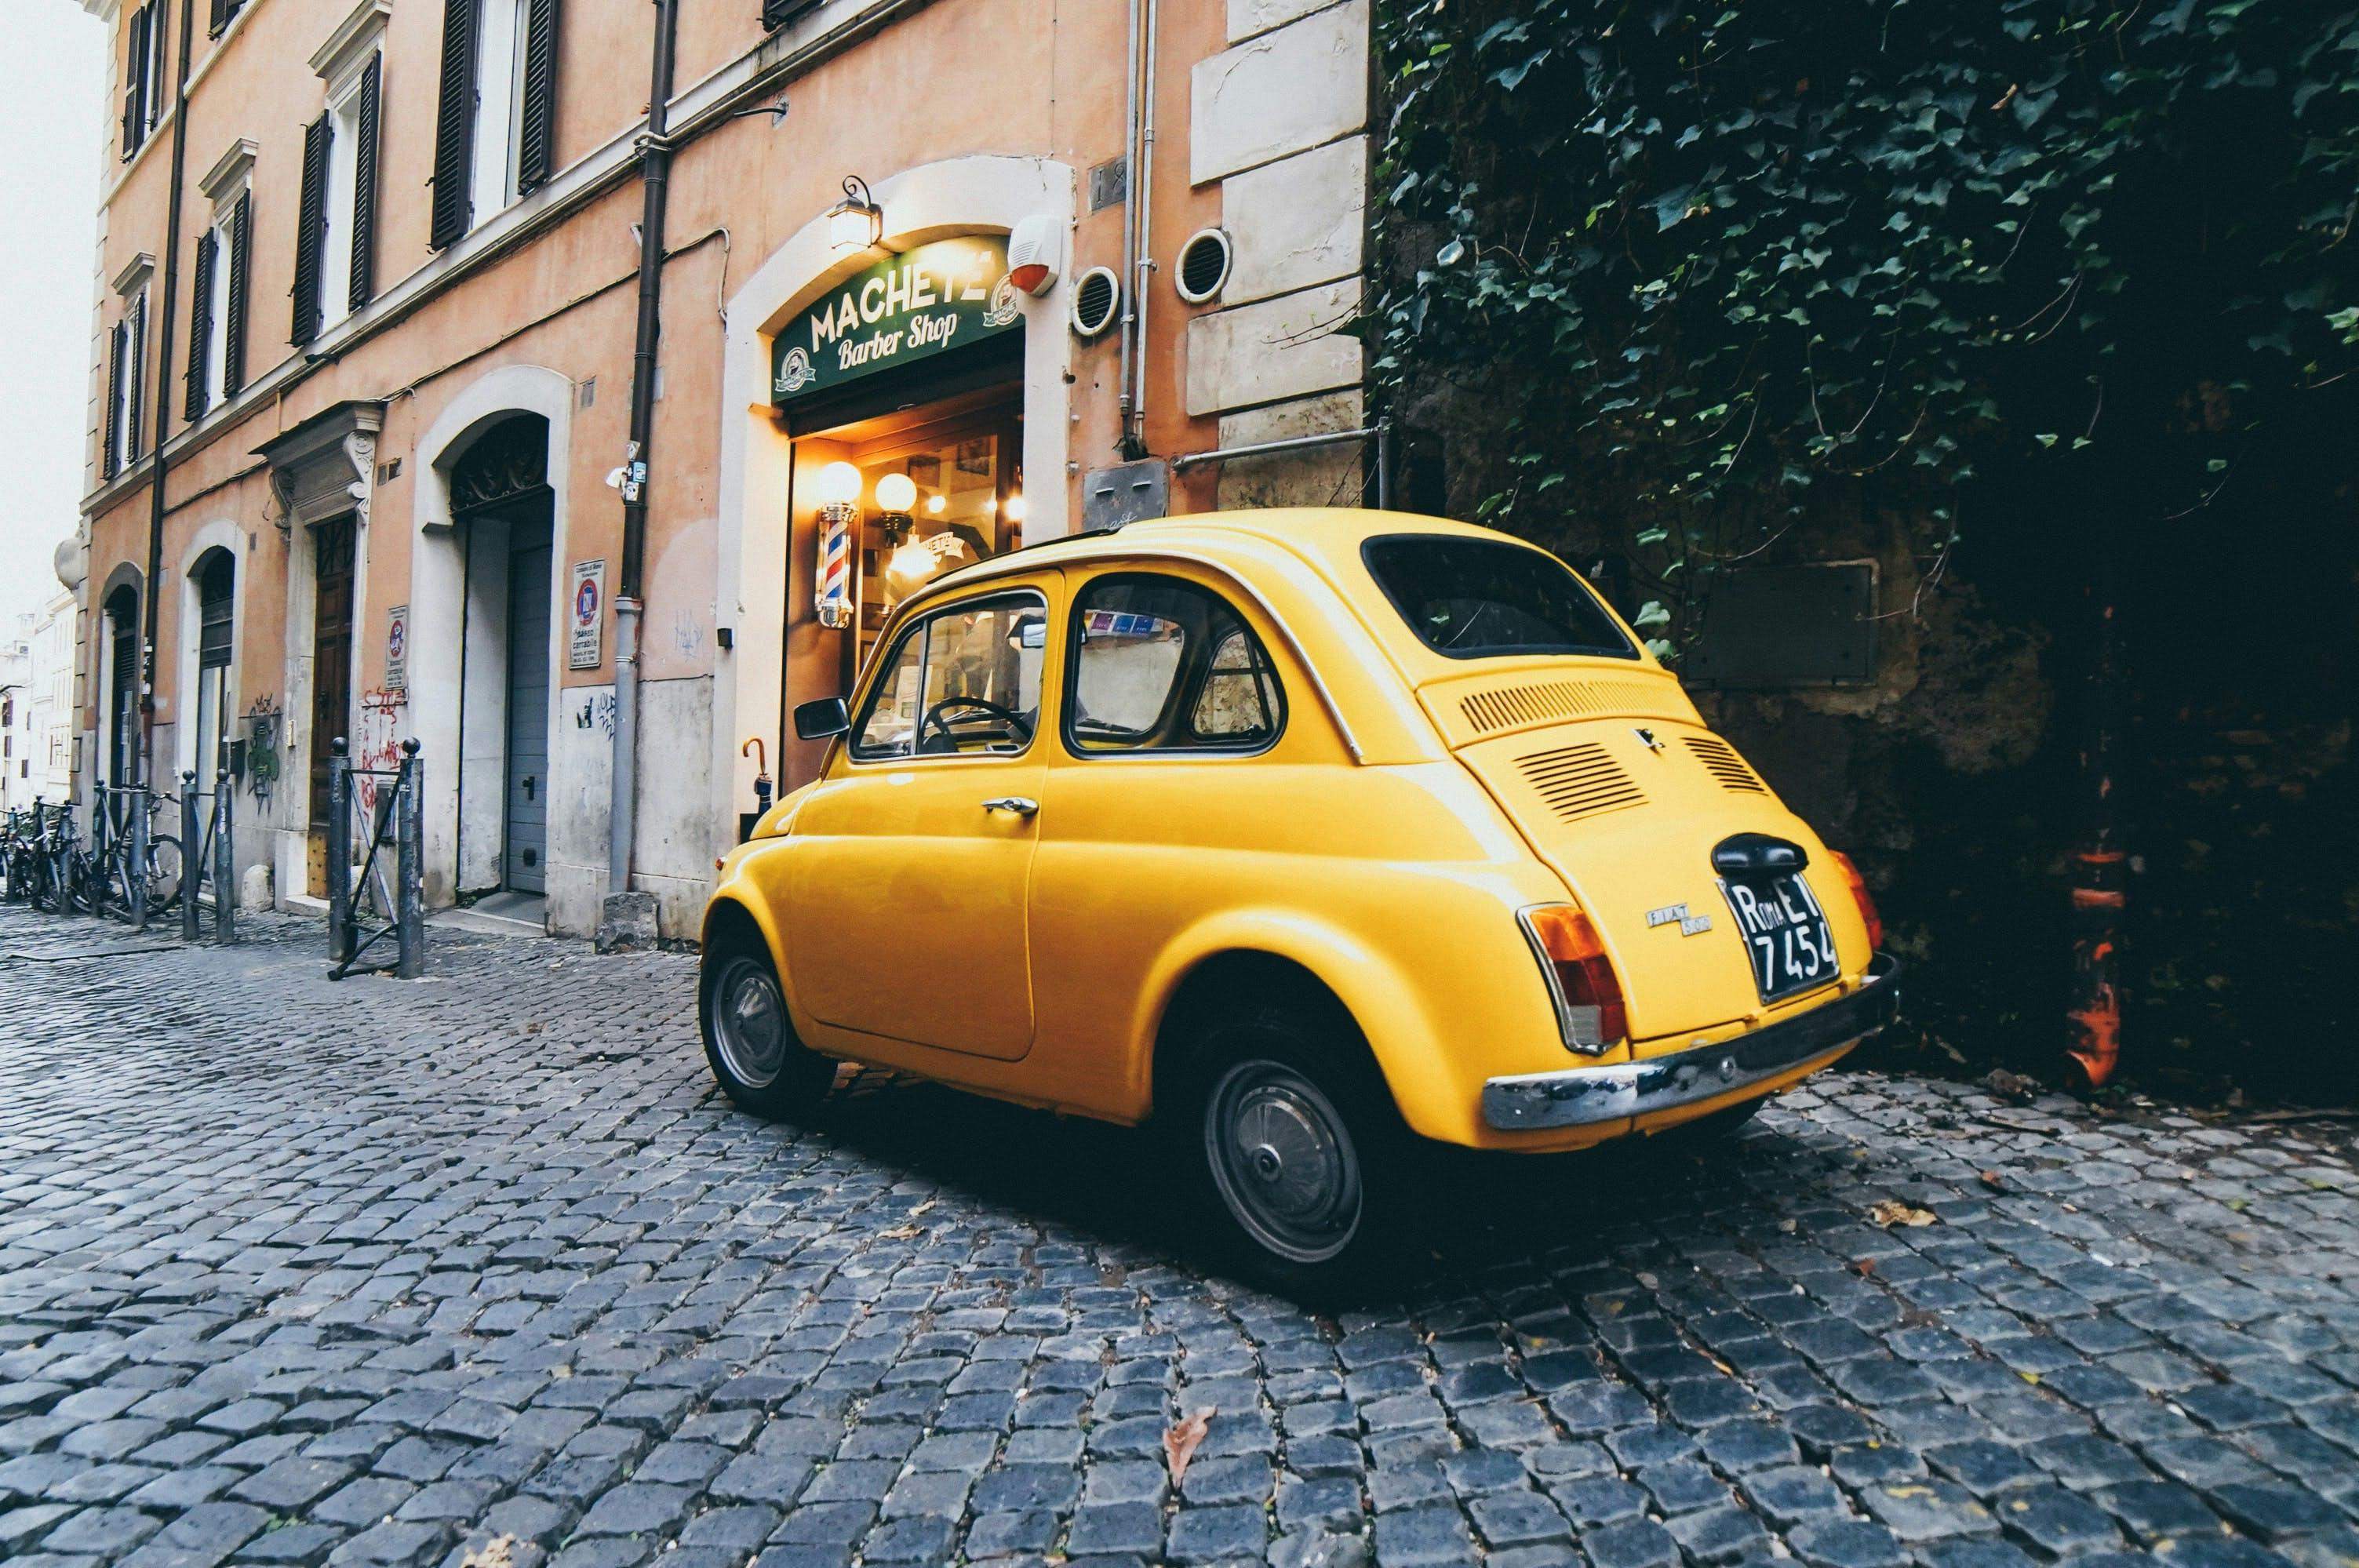 An old-fashioned yellow car parked in a street in Rome